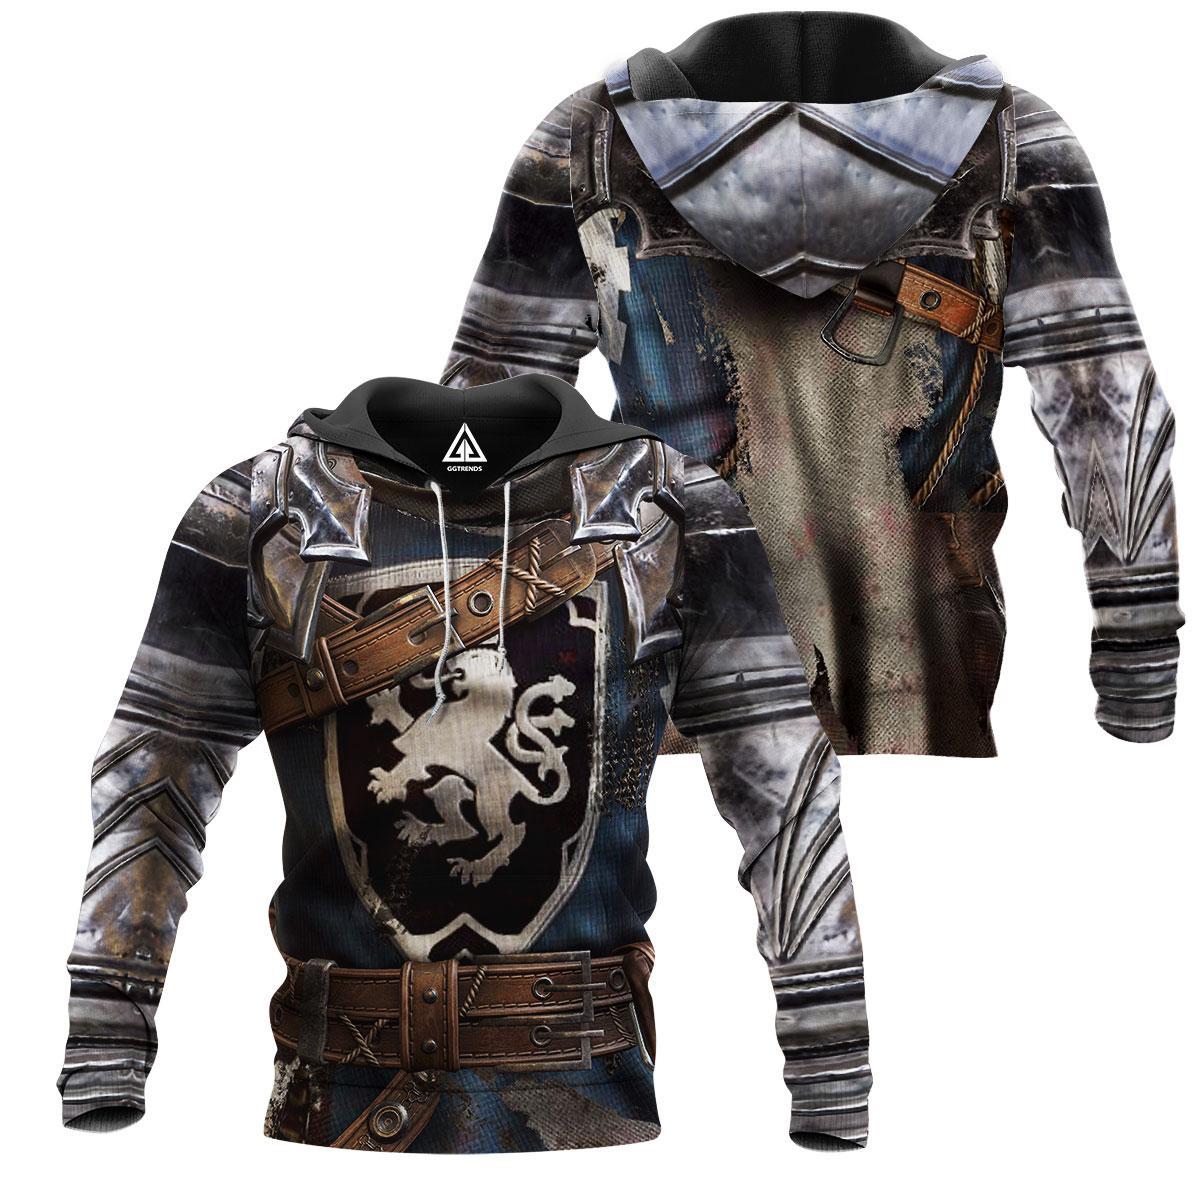 Blue Scotland Rampant Lion Knight Armor 3D All Over Printed Shirts for Men and Women NNK022801-Apparel-PL8386-Hoodie-S-Vibe Cosy™